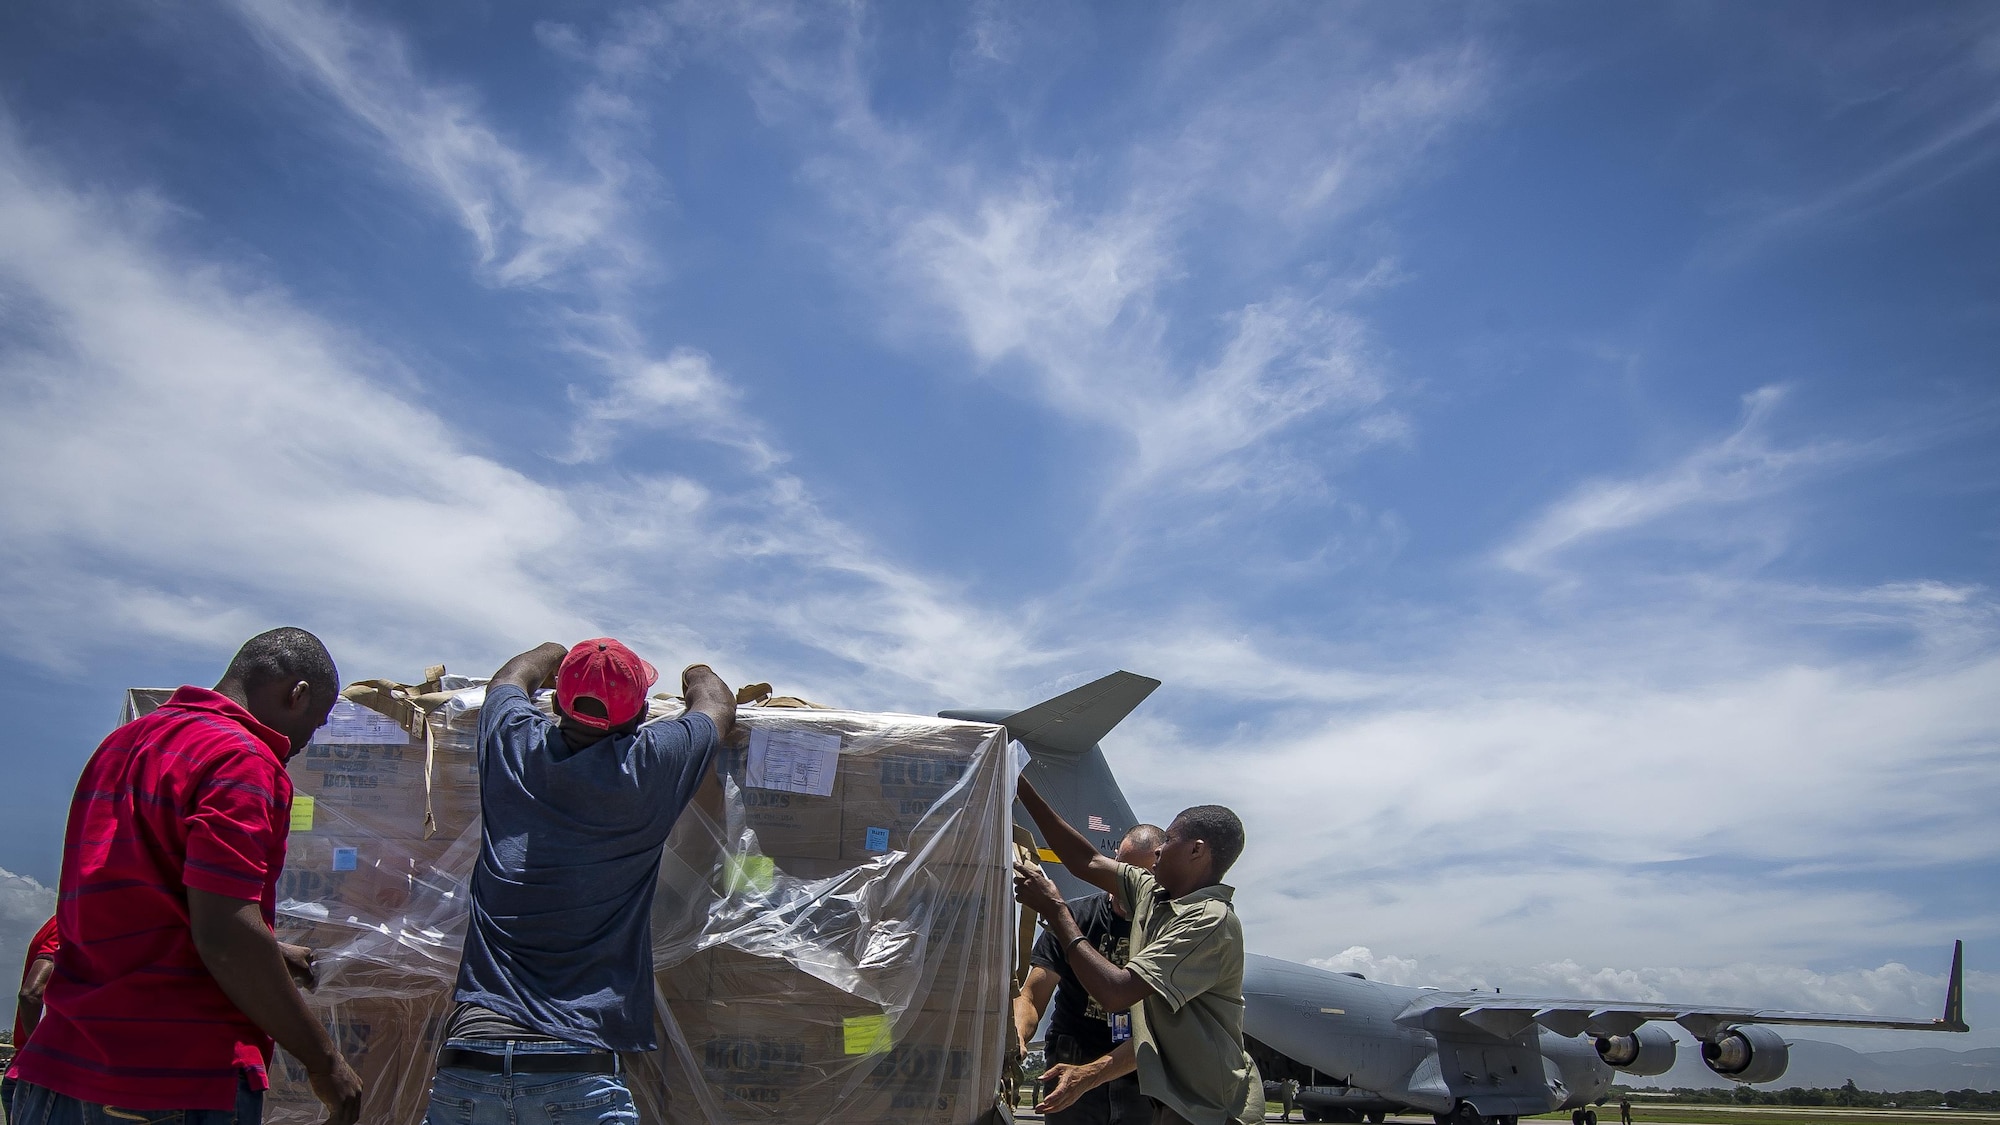 Haitian civilians unload more than 65,000 pounds of food June 13, 2015, at Port Au Prince, Haiti, during a humanitarian aid mission conducted by the 317th Airlift Squadron. After successfully unloading the cargo, the aircrew then took more humanitarian aid to Saint Kitts and Nevis. (U.S. Air Force photo by Senior Airman Tom Brading)